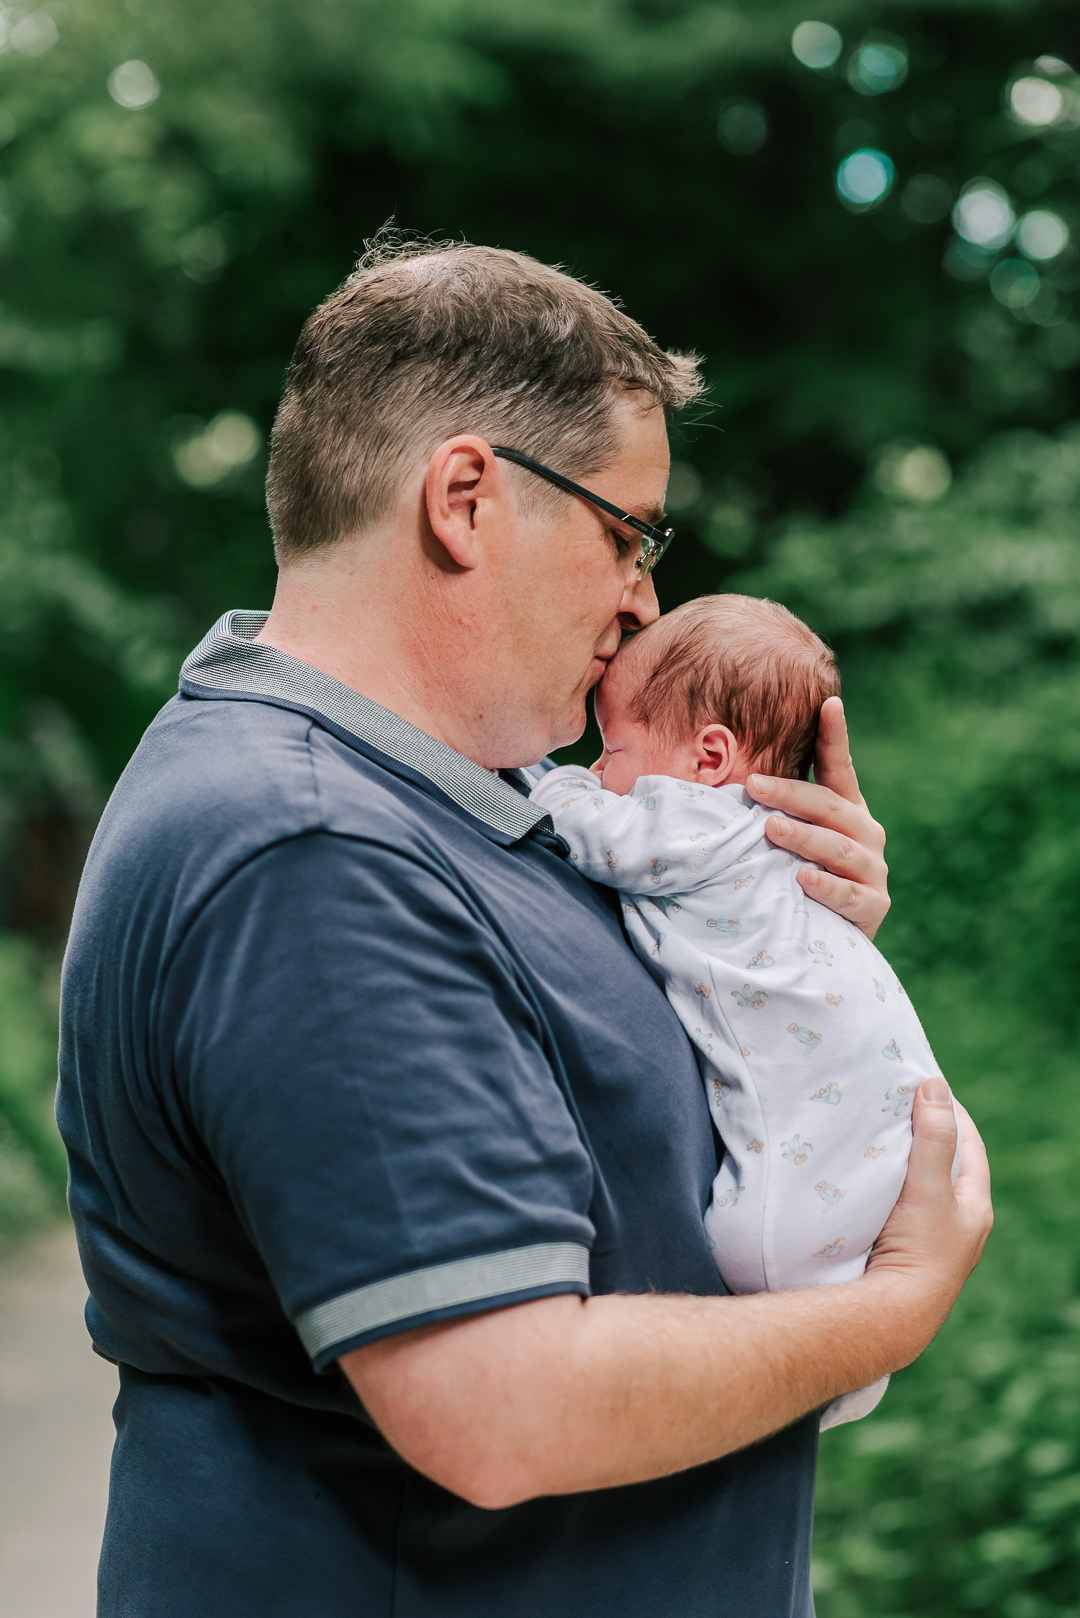 A father cradles his newborn baby on hist chest while kissing its head and standing in a park after visiting a centreville chriopractic center